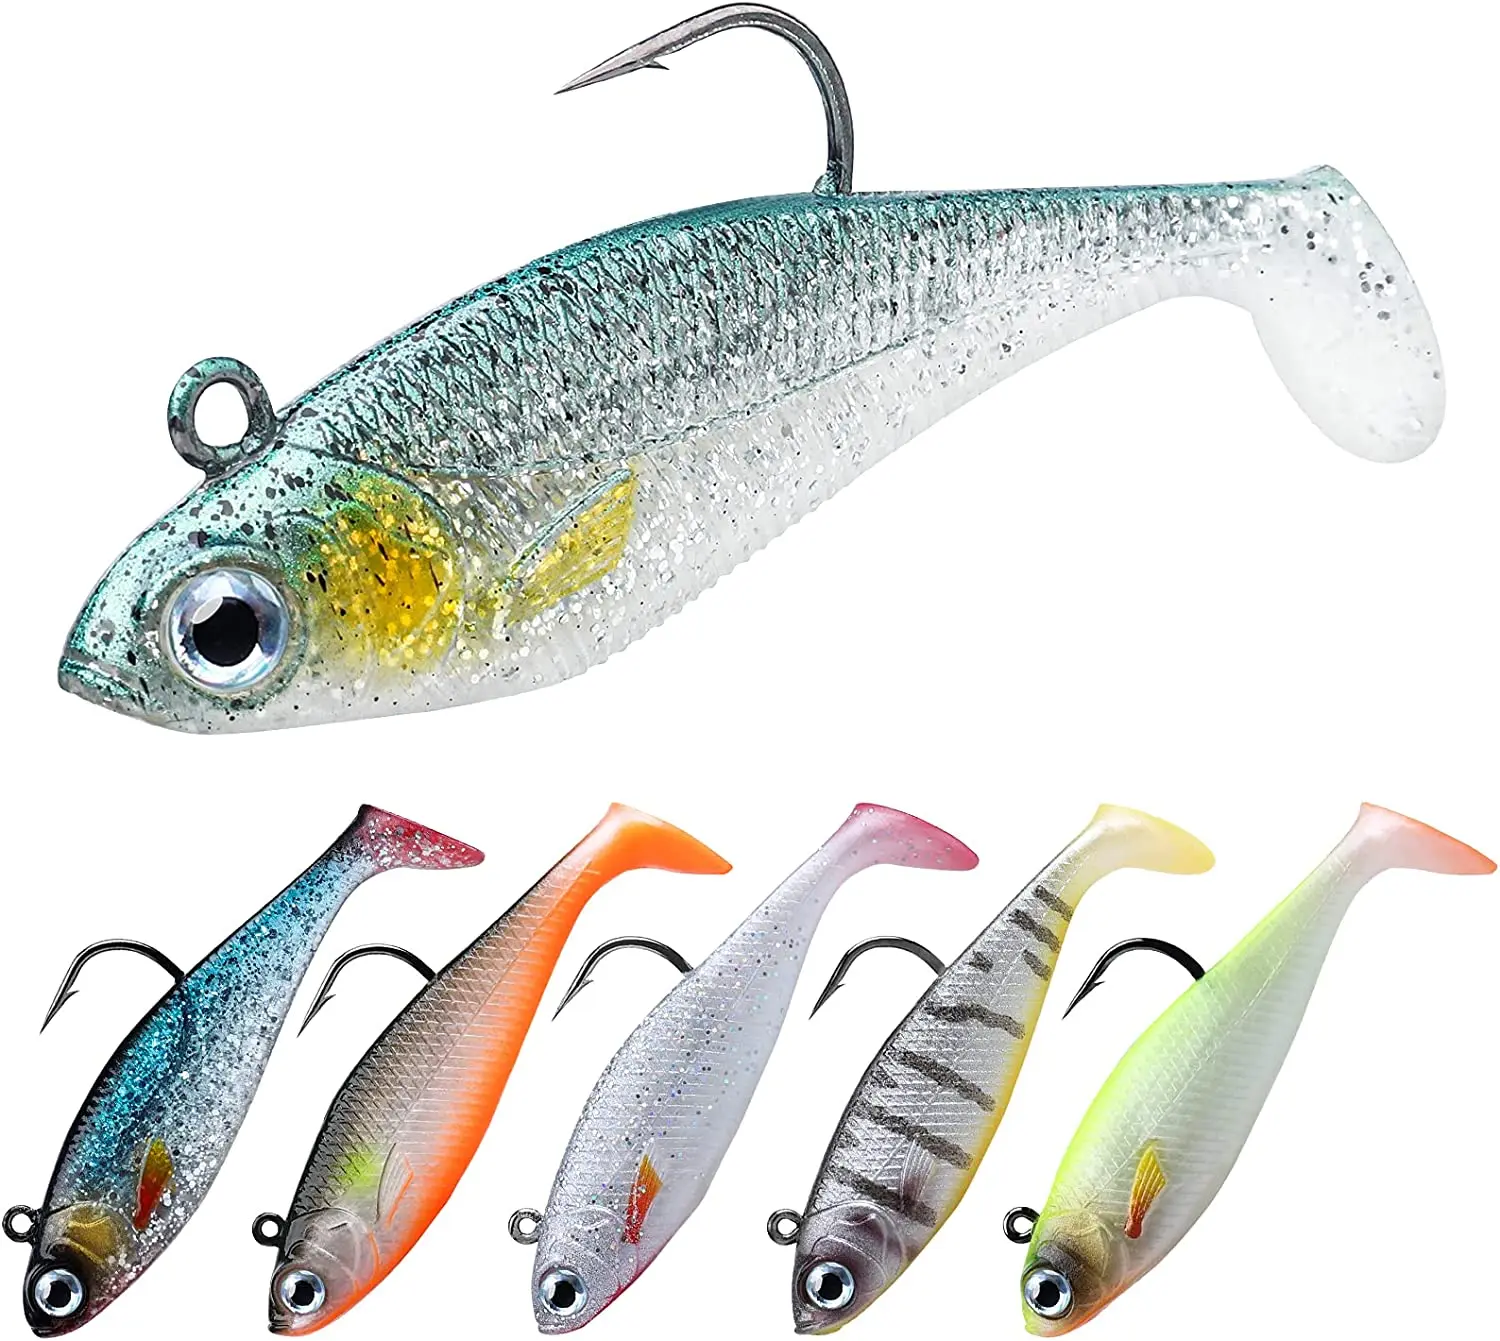 Fishing Lures for Bass, VMSIXVM Fishing Jig Head Swim Shad Lure, Soft  Plastic Swimbaits with Paddle Tail, Trout Bass Sinking Baits Kit for  Saltwater/Freshwater, Fishing Gear and Fishing Gifts A2-Weedness Pre Rigged